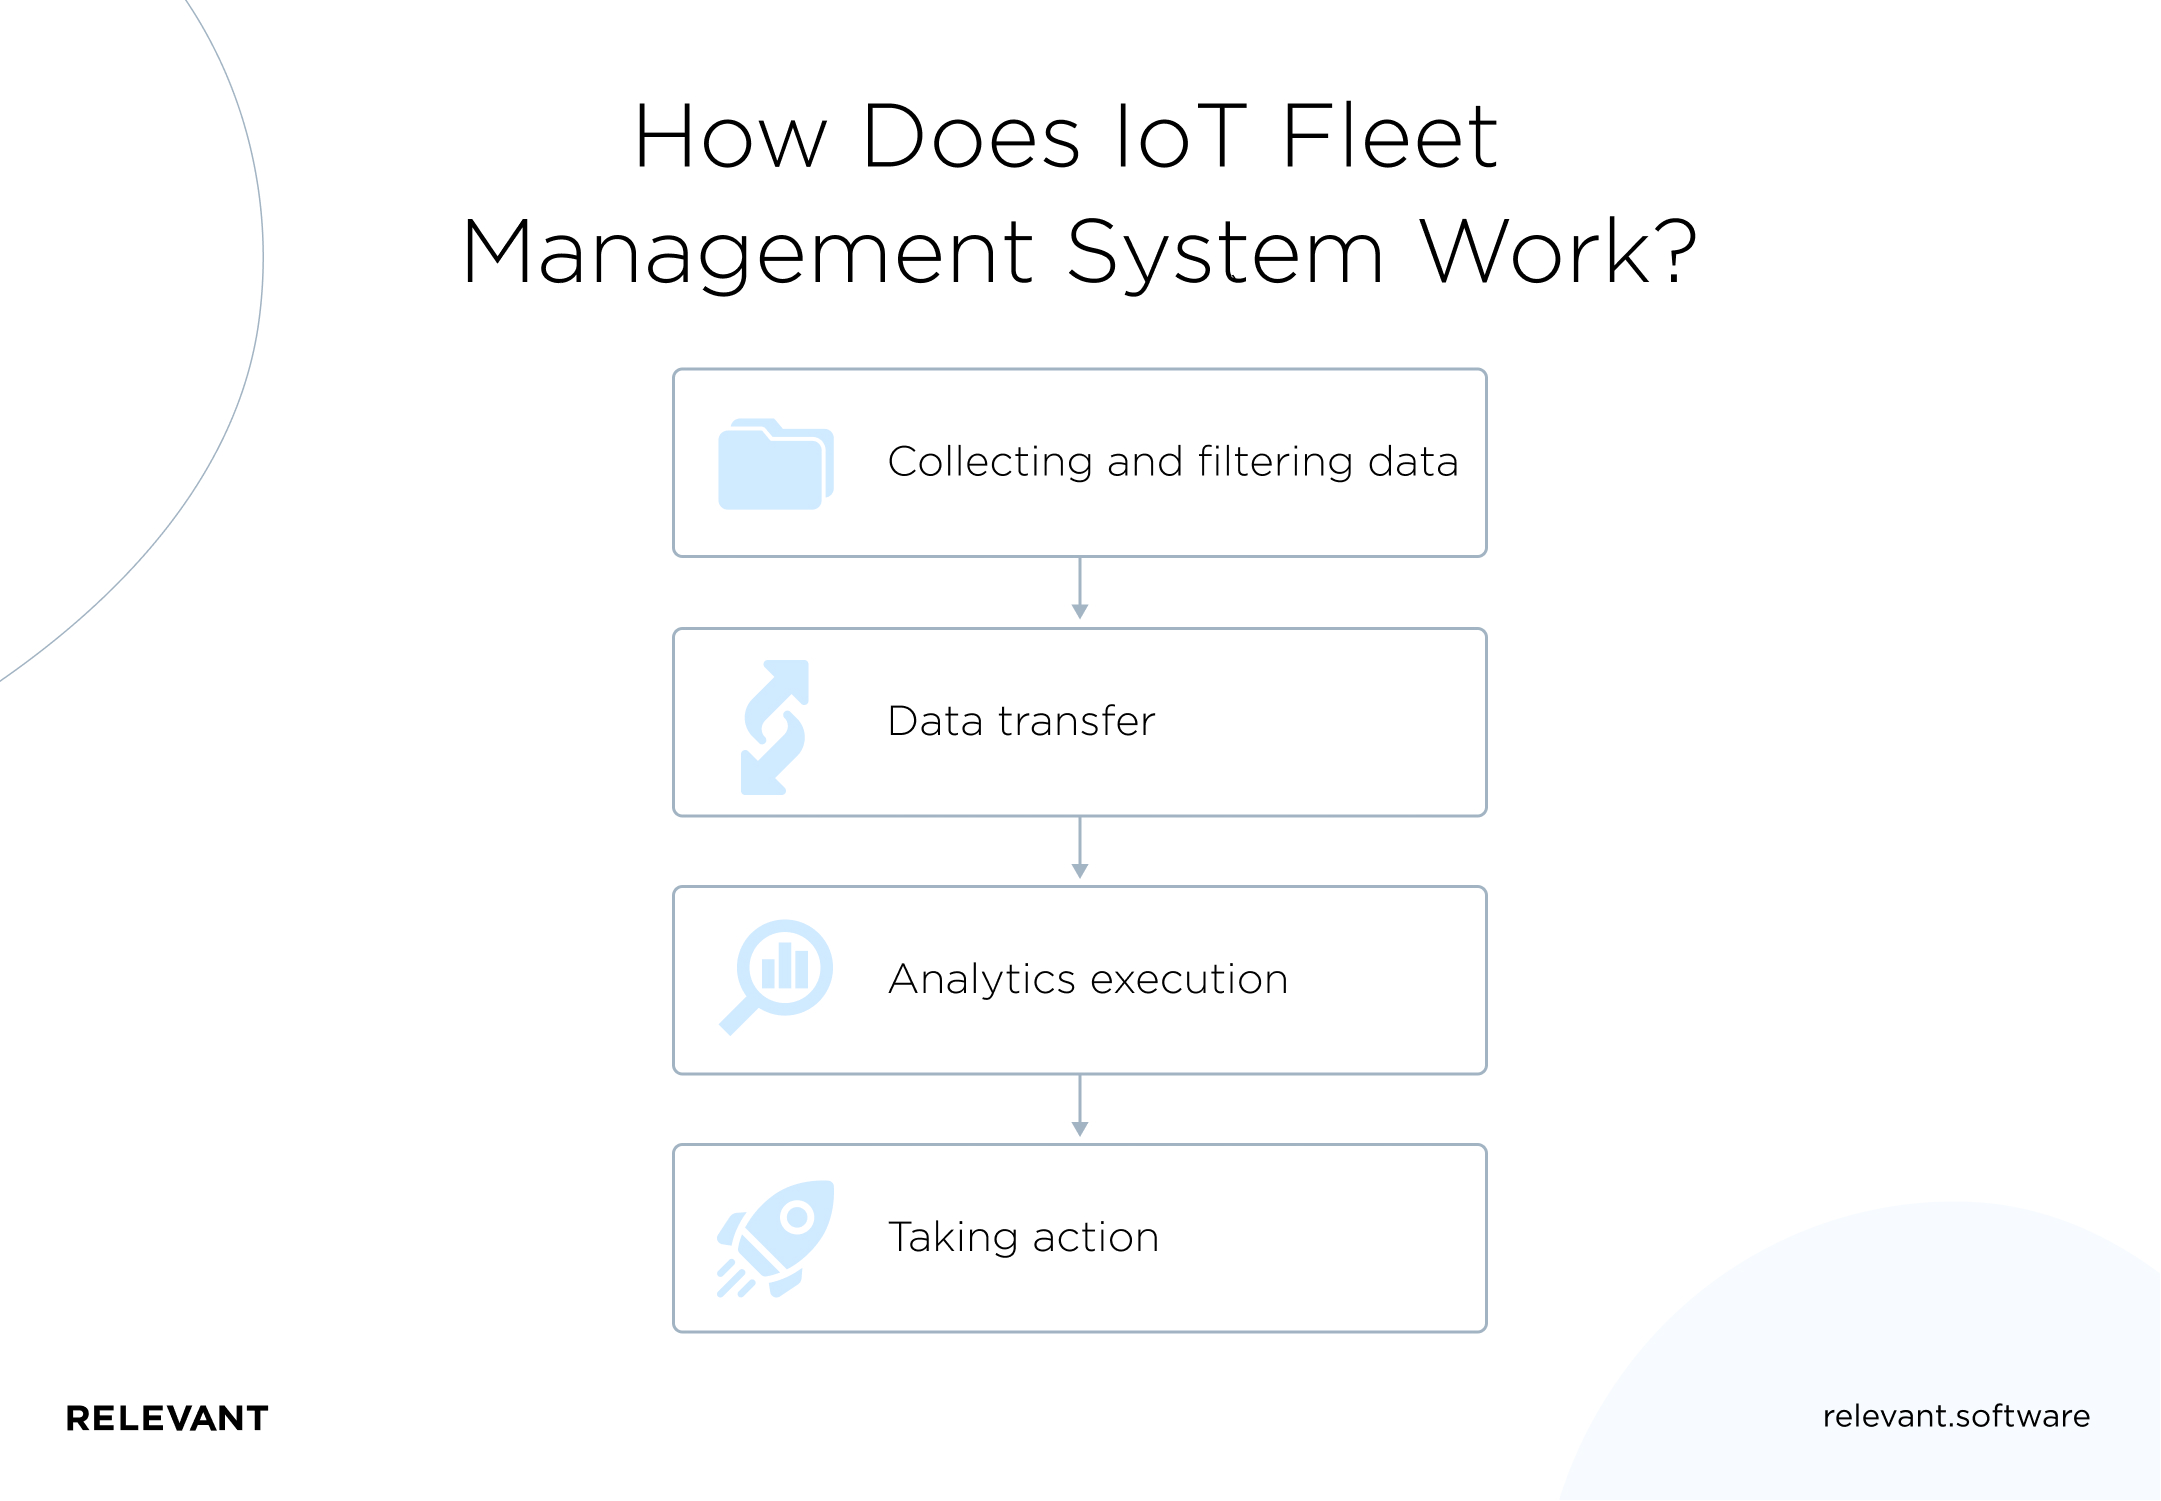 How Does IoT Fleet Management System Work